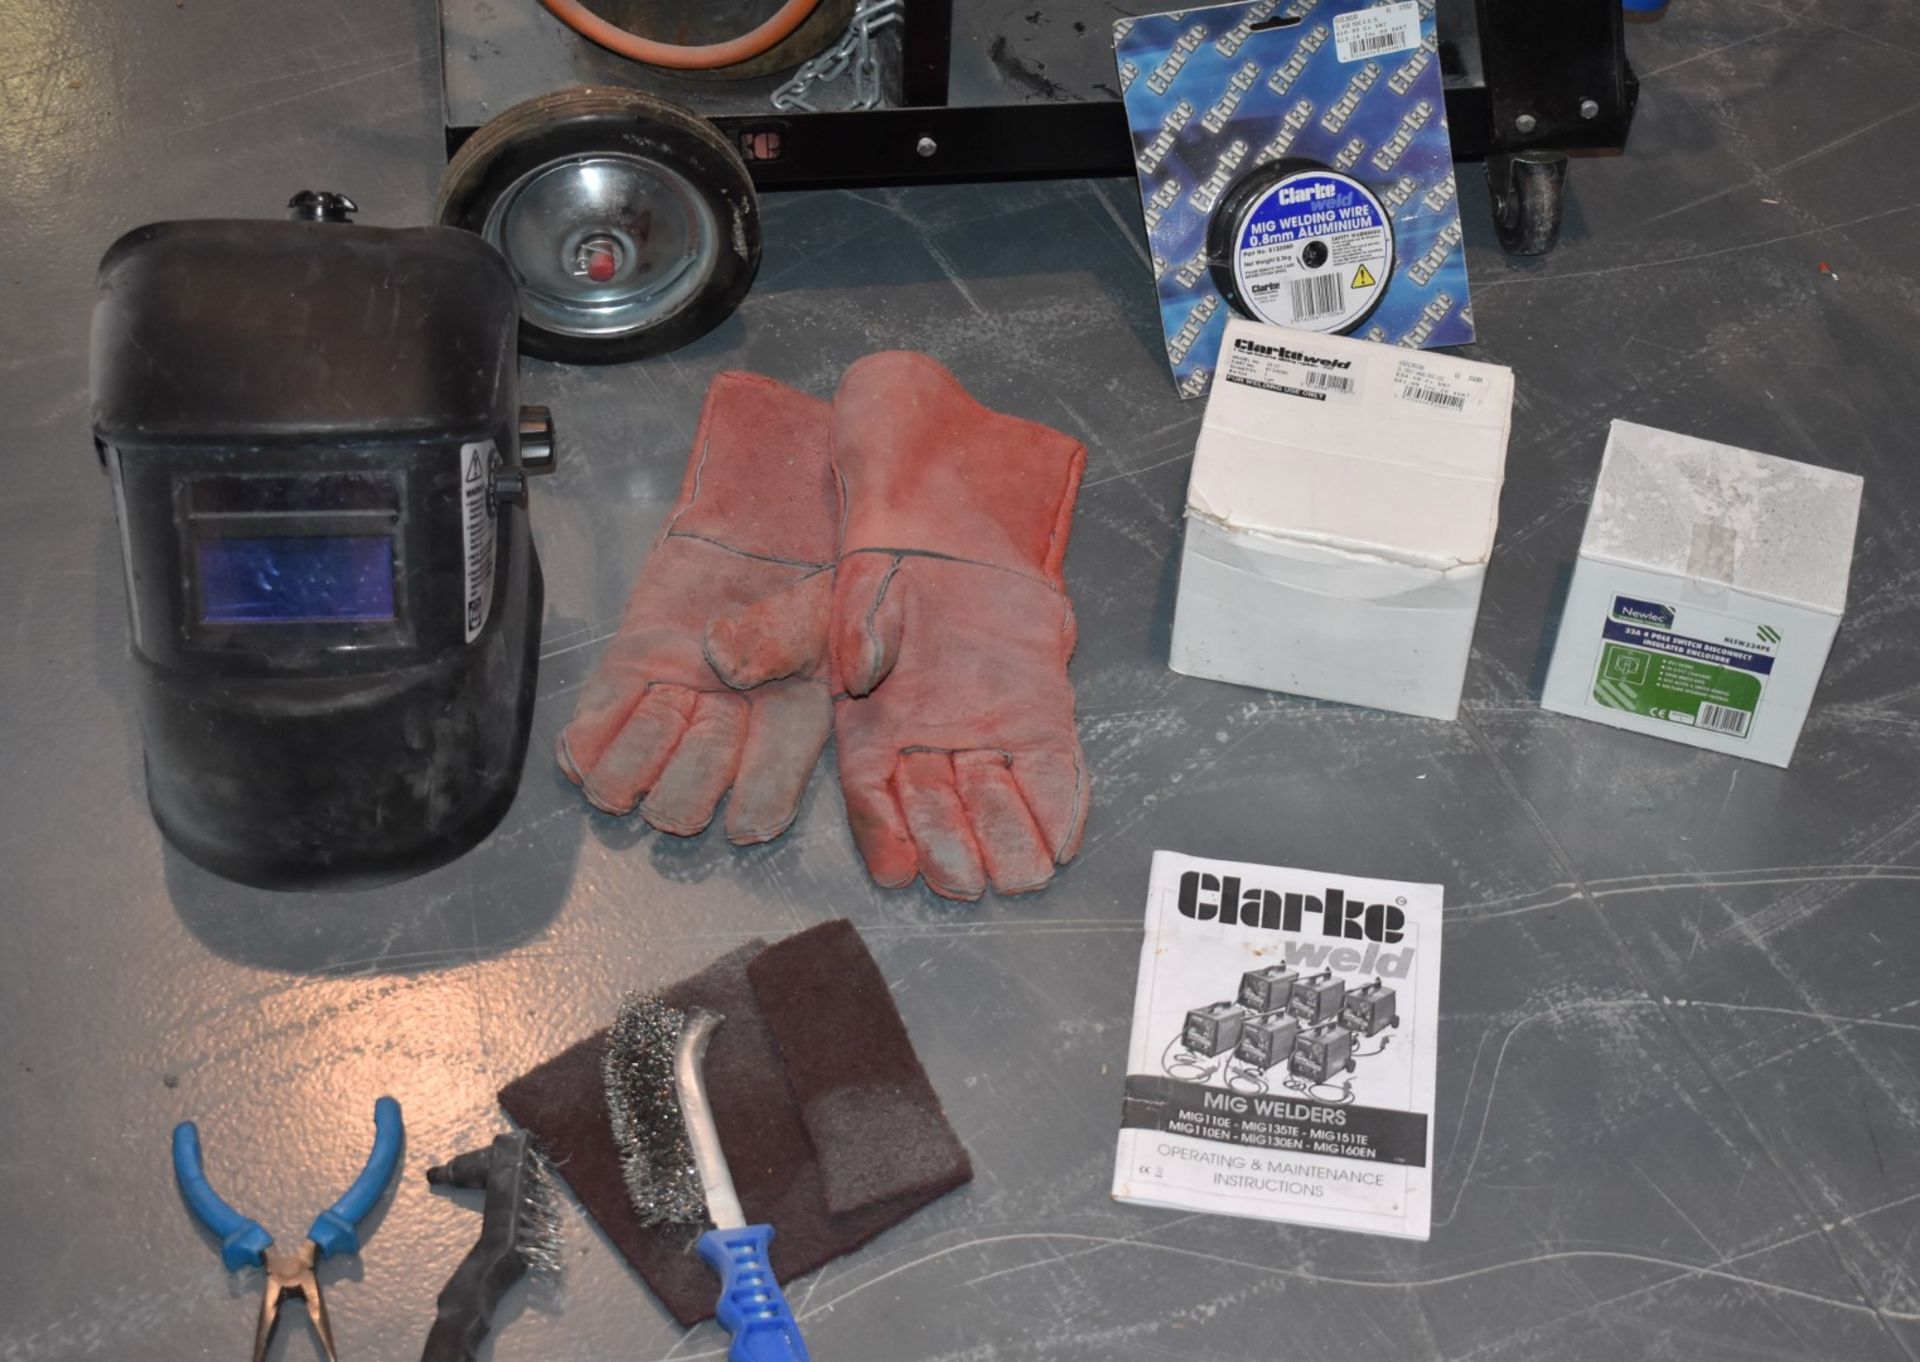 1 x Clarke MIG160EN Turbo No-Gas/Gas MIG Welder With Stand and Accessories - Ref 449 - CL501 - - Image 8 of 11